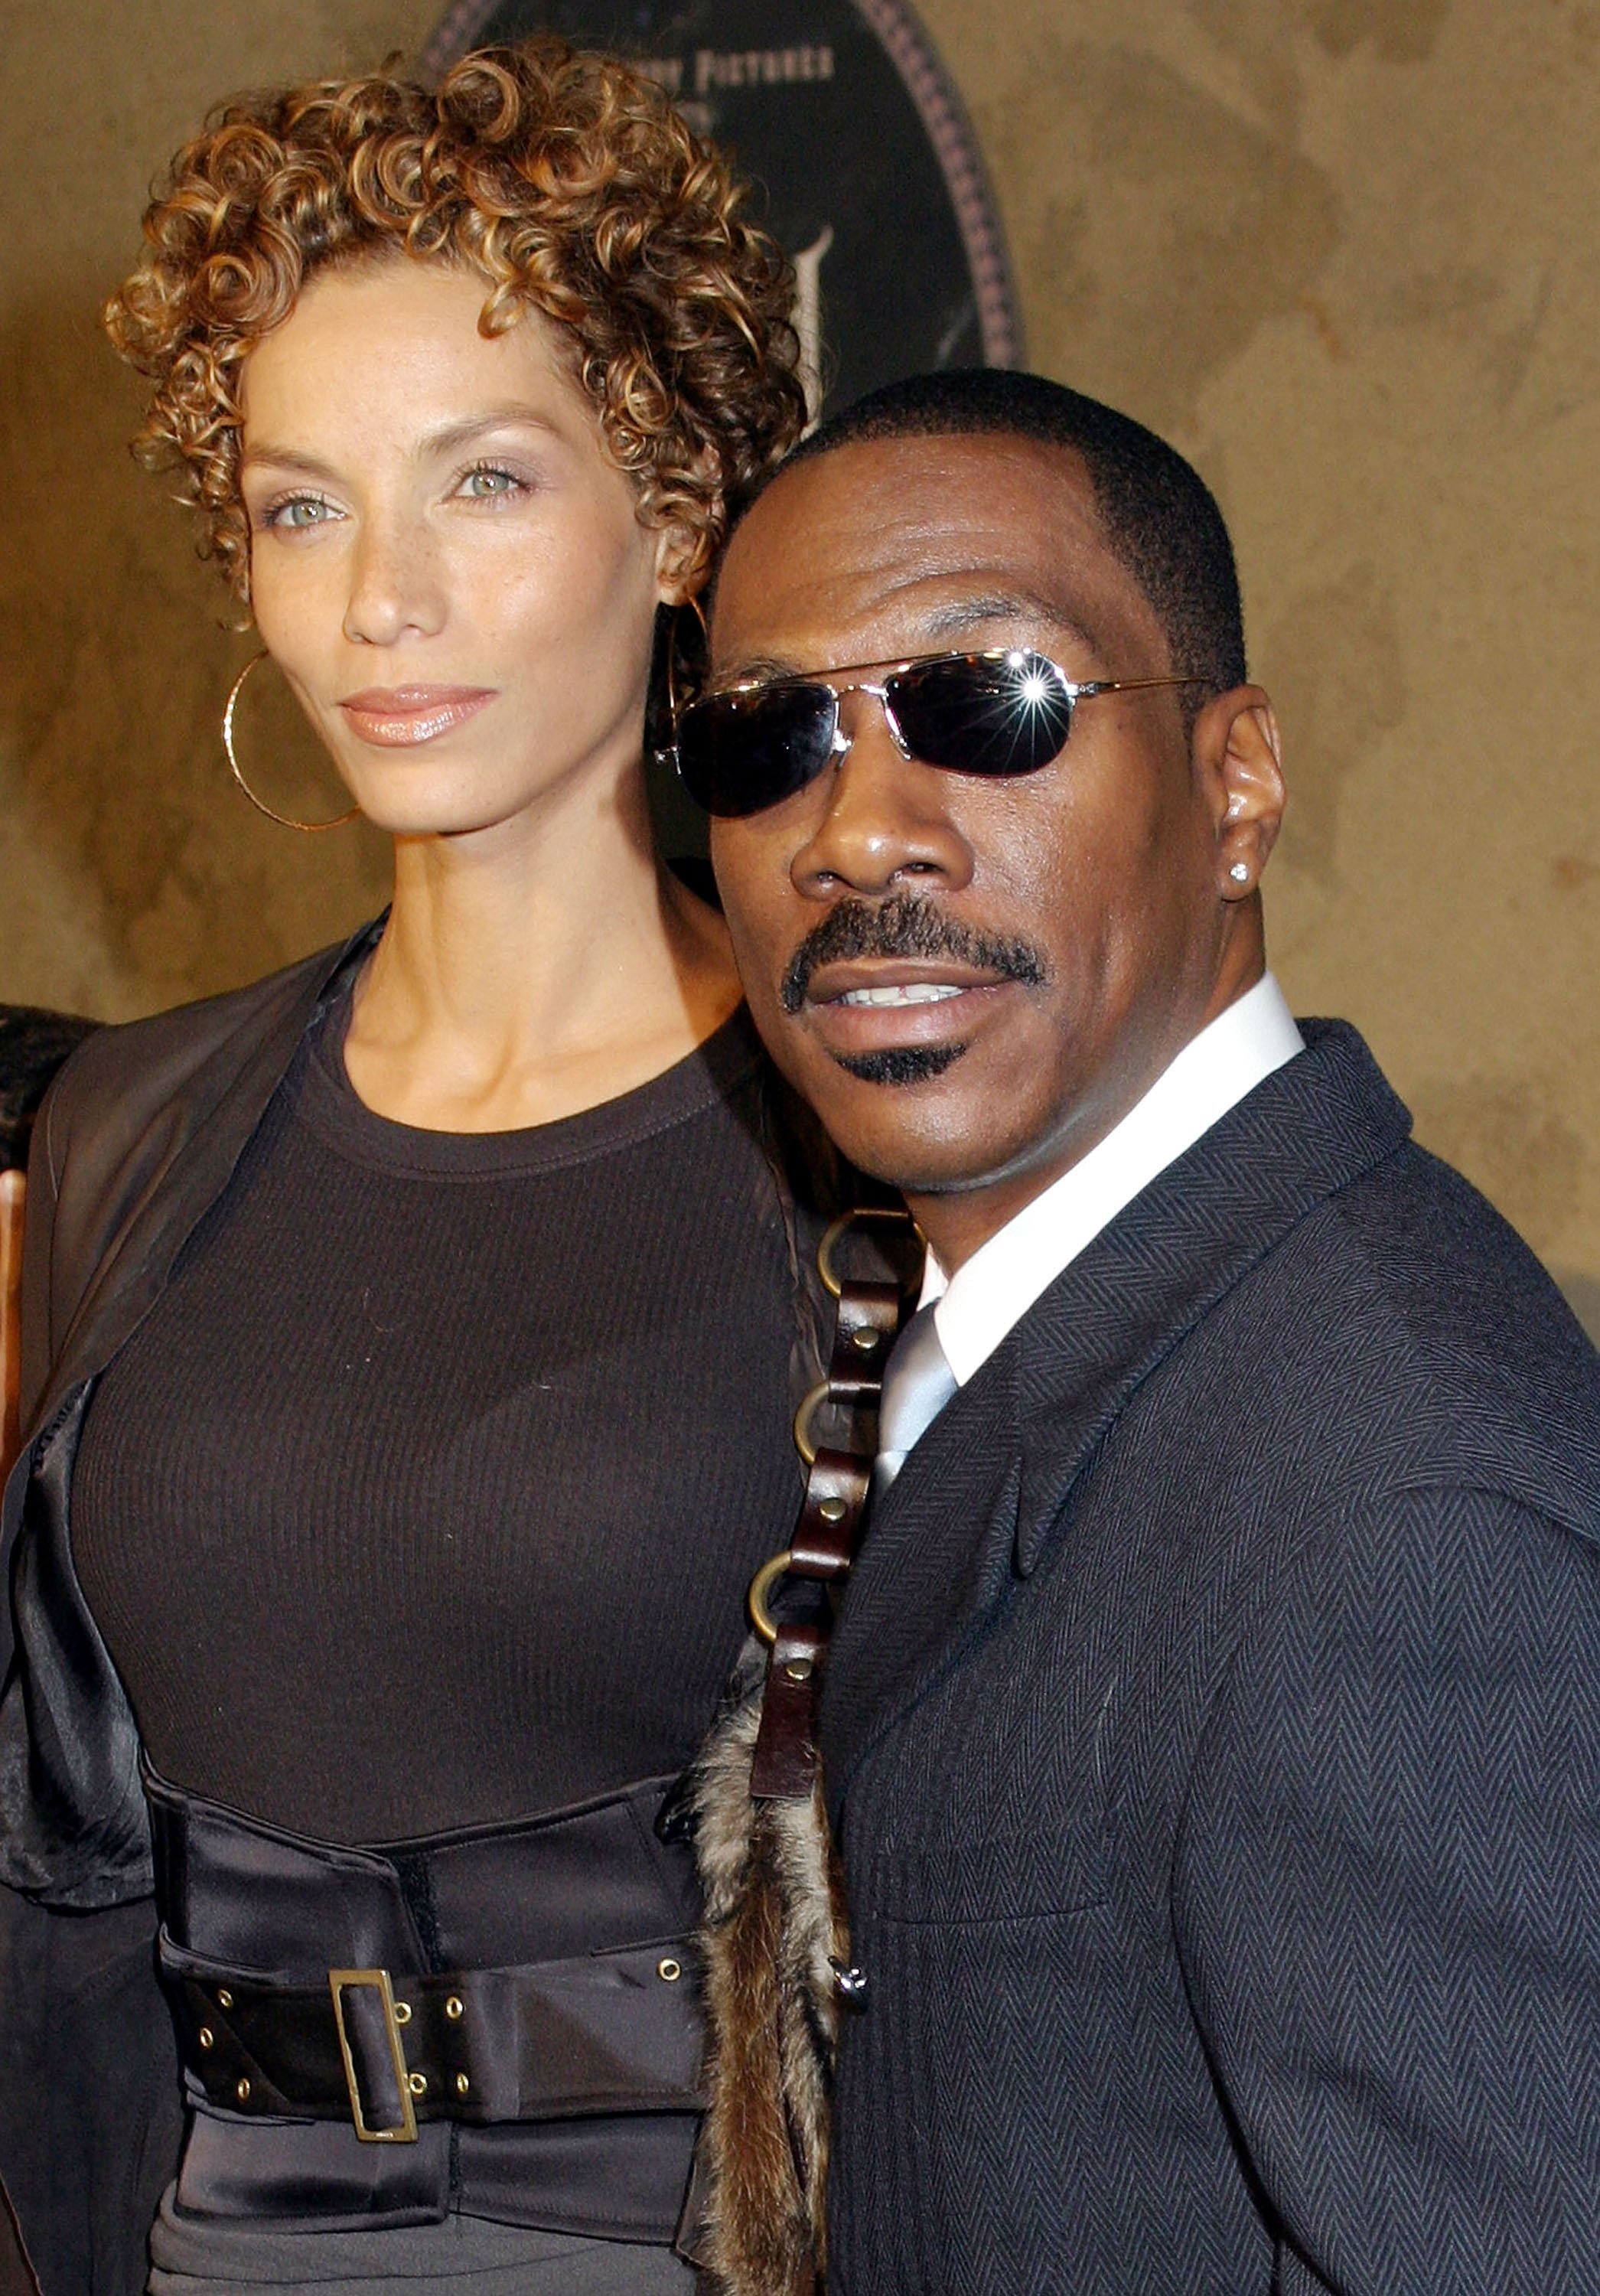 Eddie Murphy and Nicole Murphy at the world premiere of the film, "The Haunted Mansion" at the El Capitan Theatre on November 23, 2003. | Photo: Getty Images